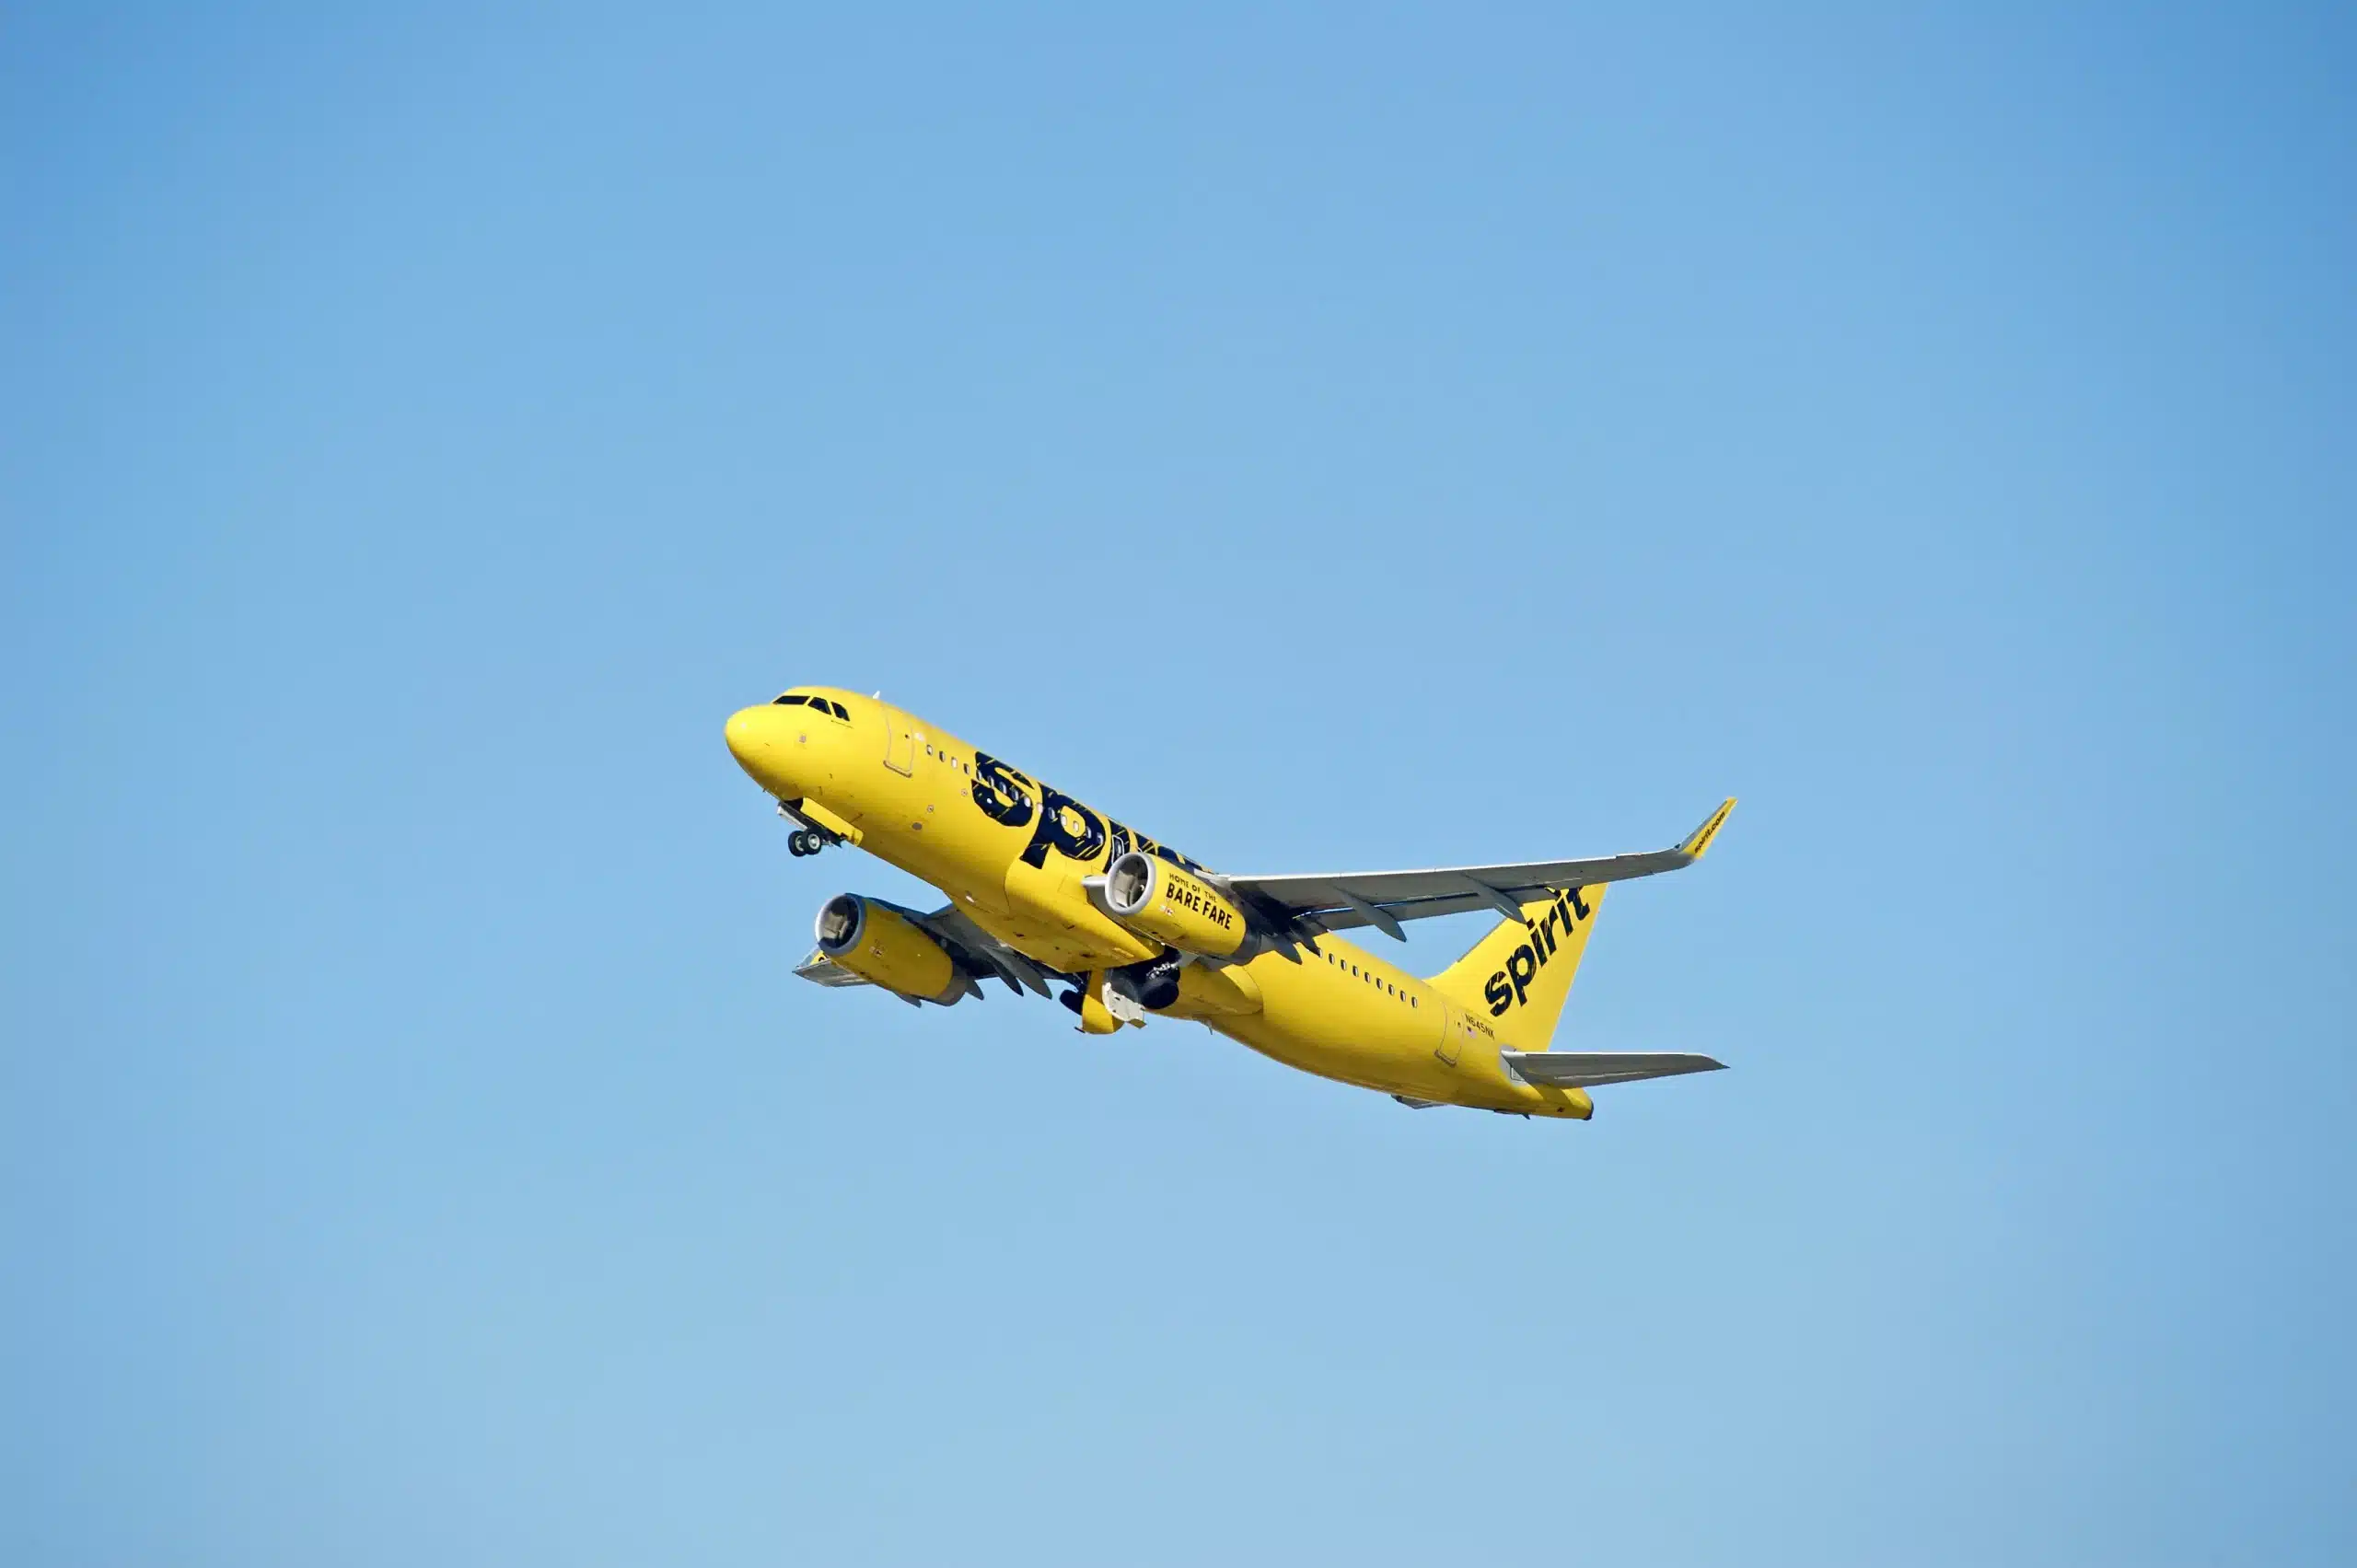 Spirit Airlines and Kiwi.com Partnership Extends Access to Affordable Fares